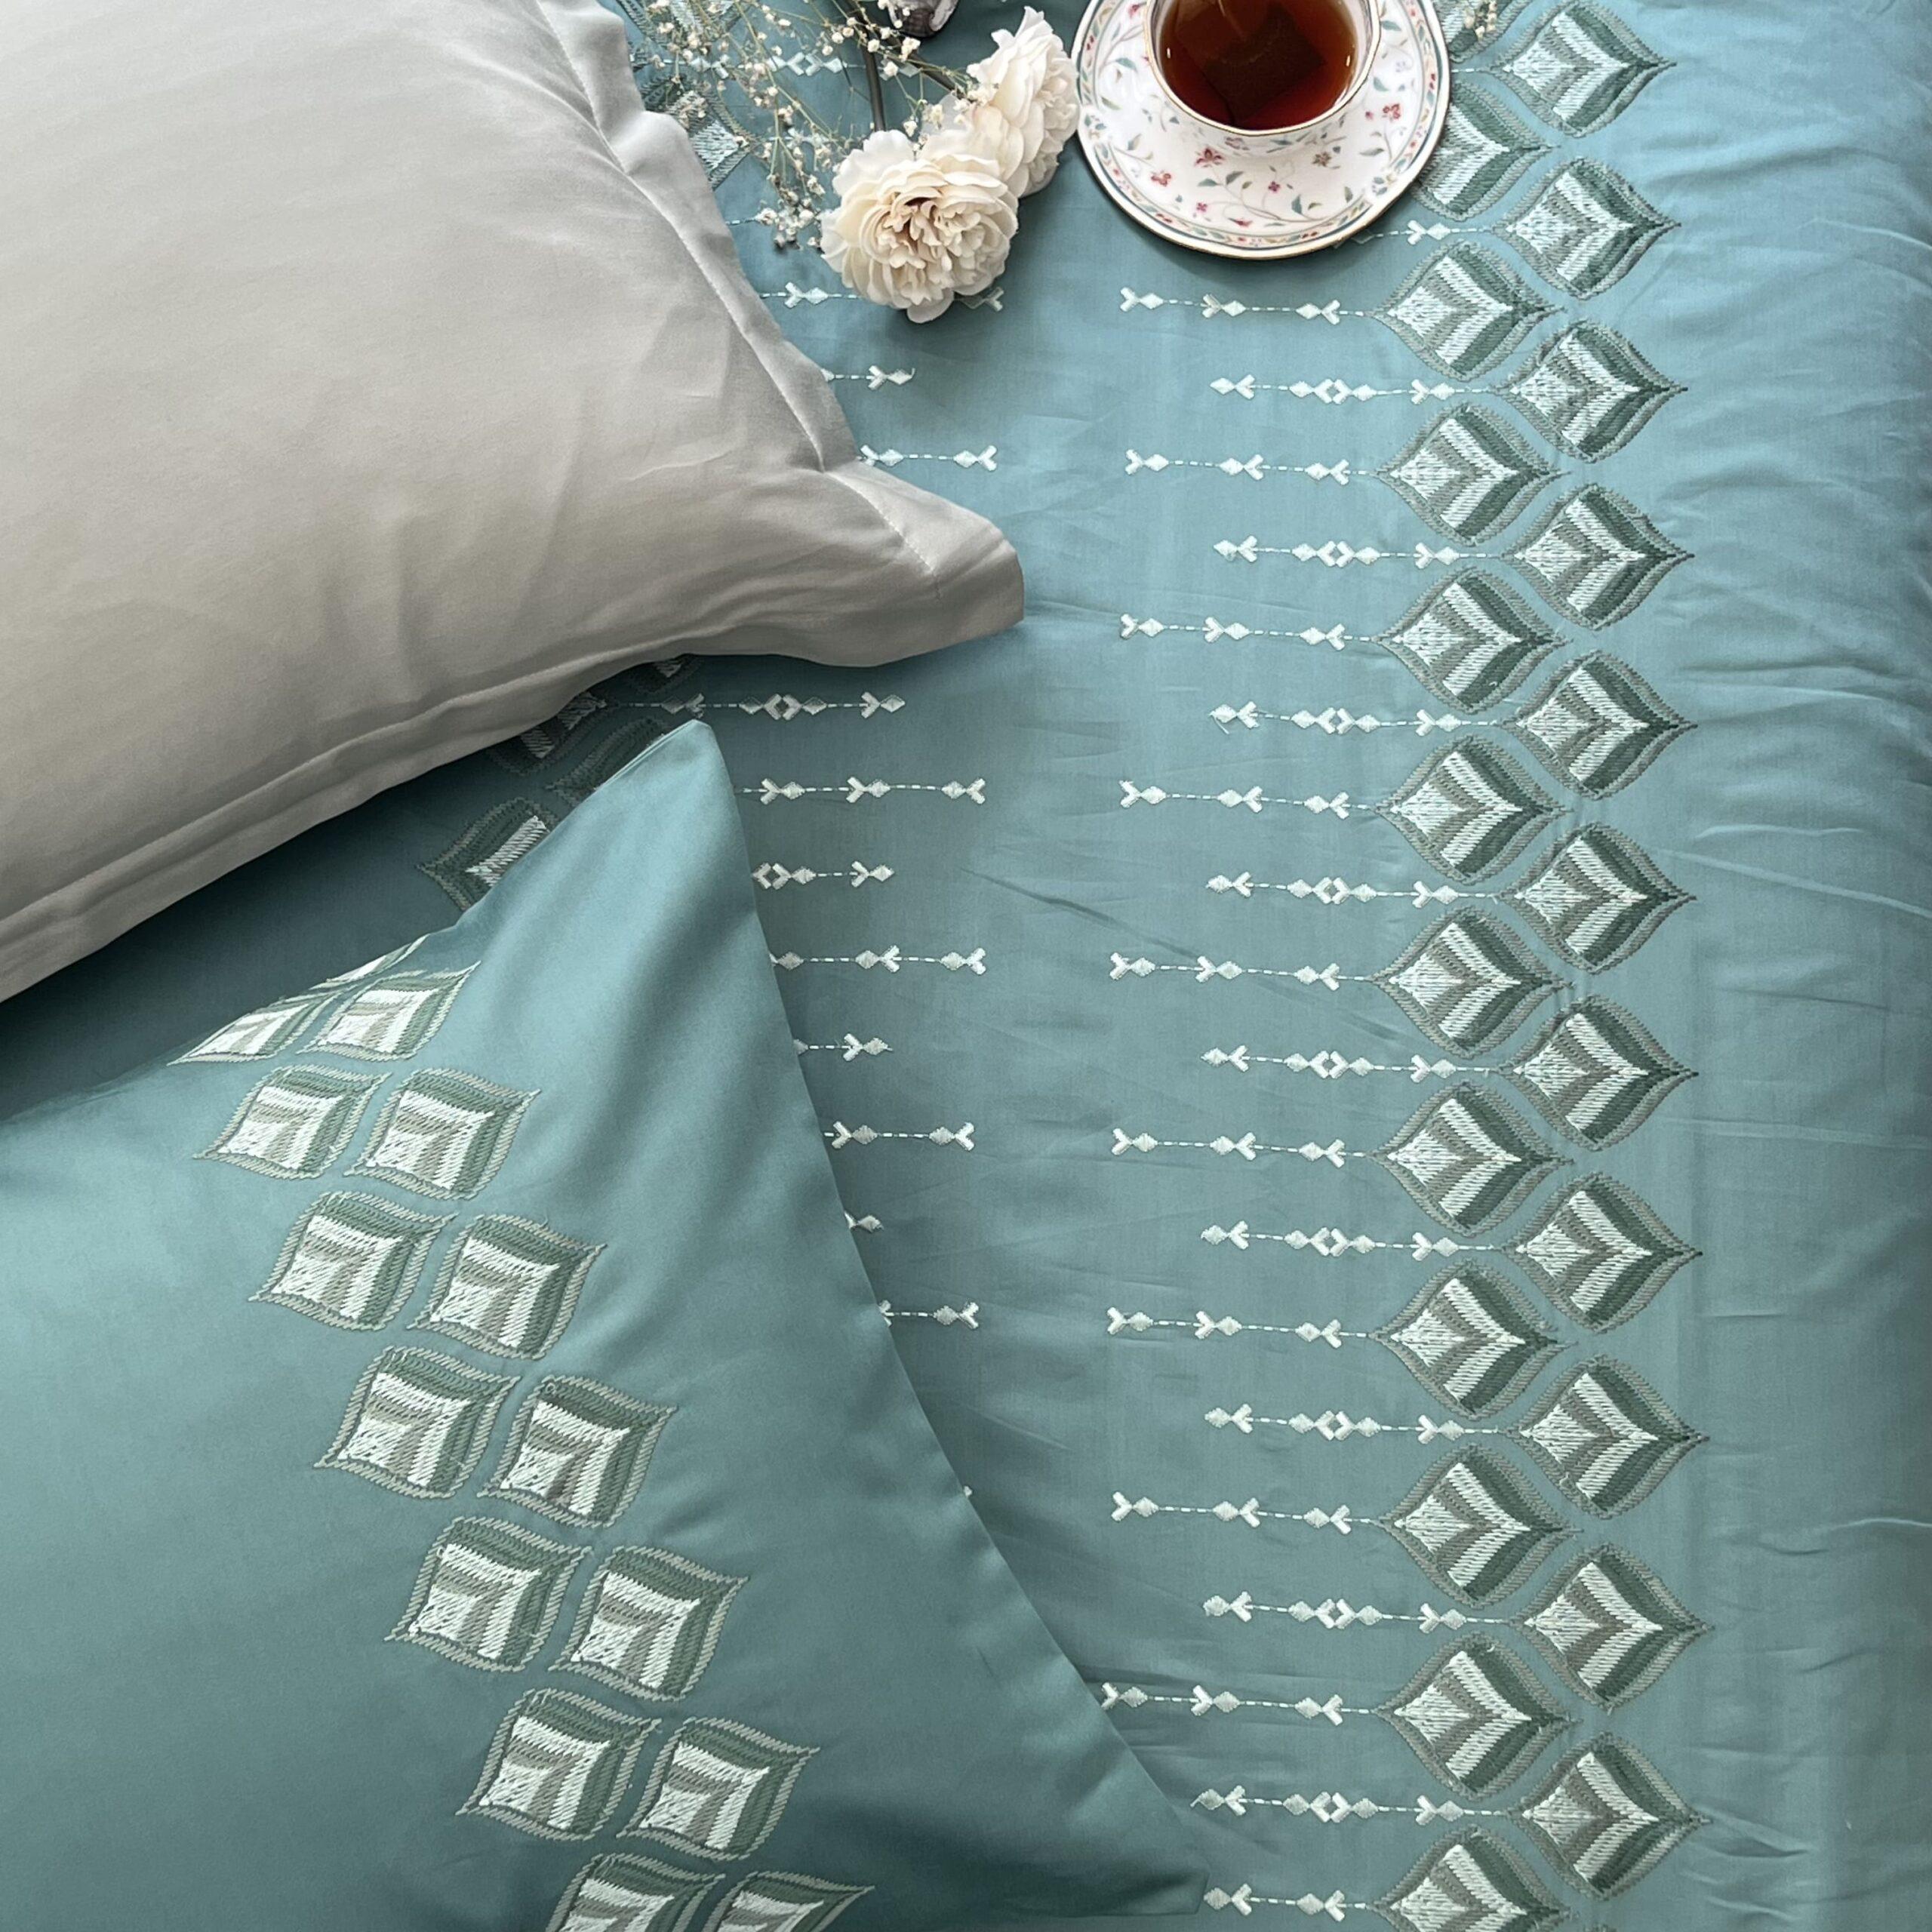 Leaflet Turquoise Syona Duvet Cover